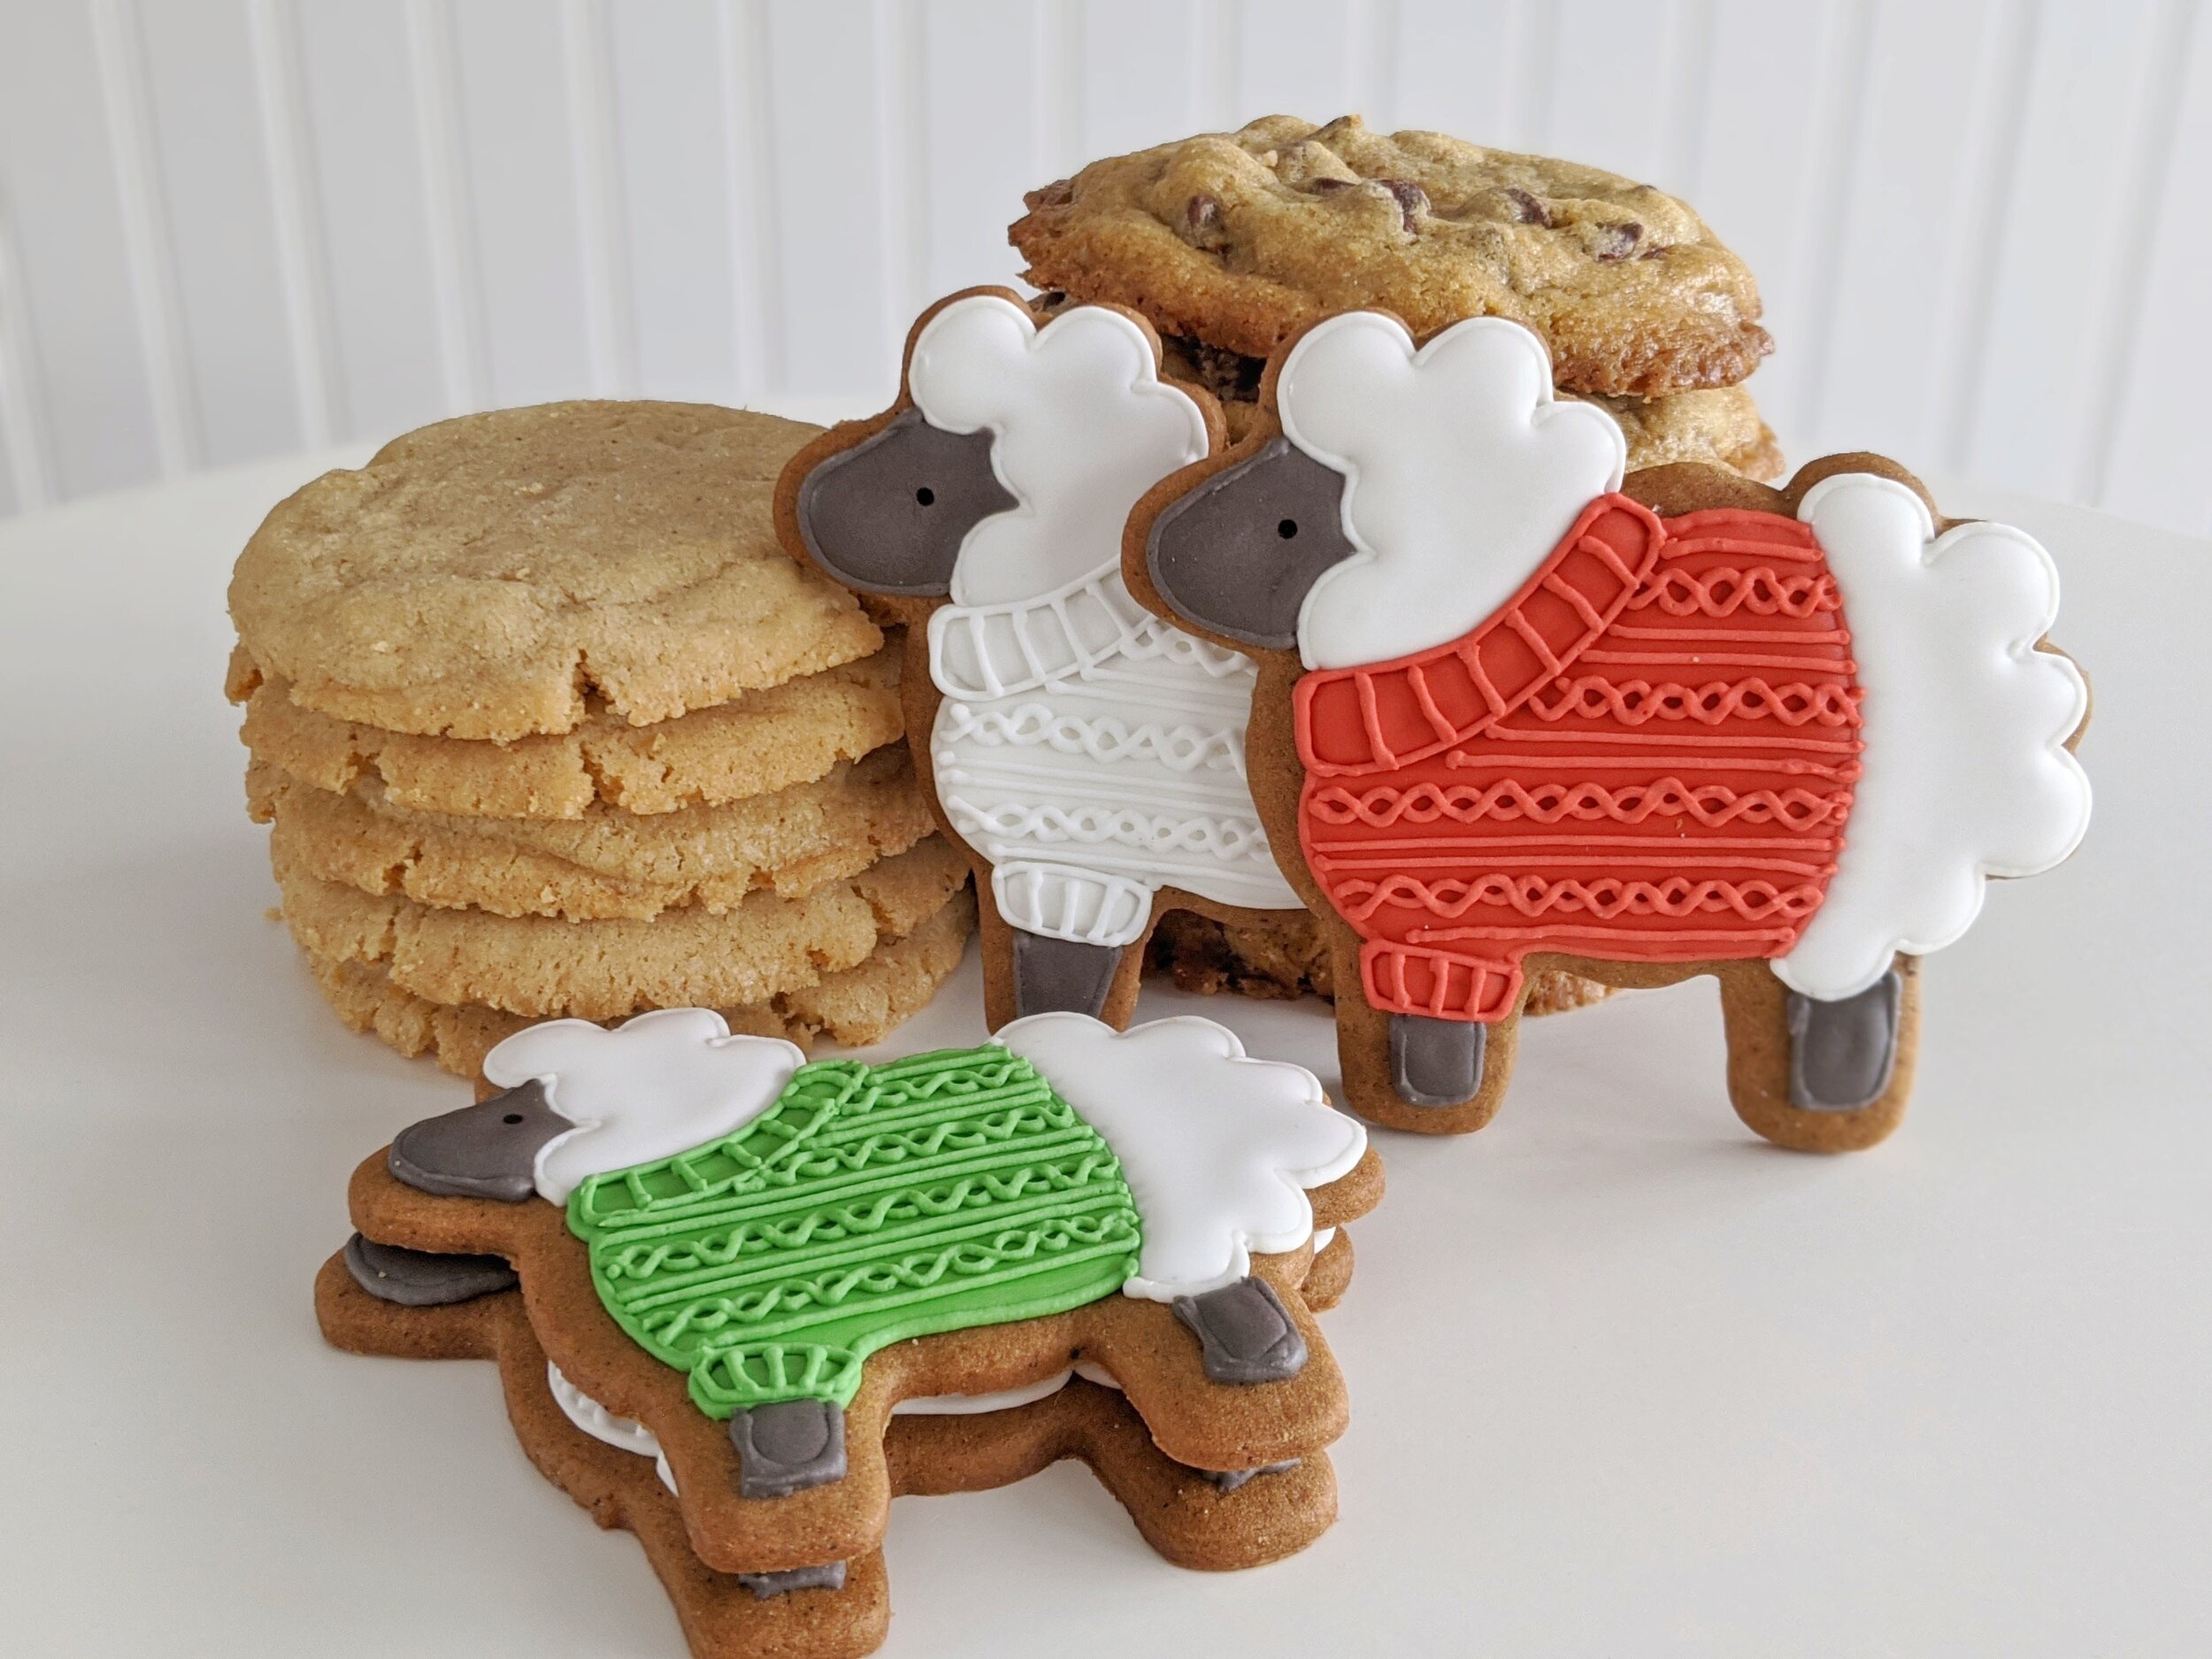  ( 2020 ) Made a whole herd of gingerbread sheep in cozy cable knit sweaters to ship to family and friends along with my chocolate chip and brown butter sugar cookies. 